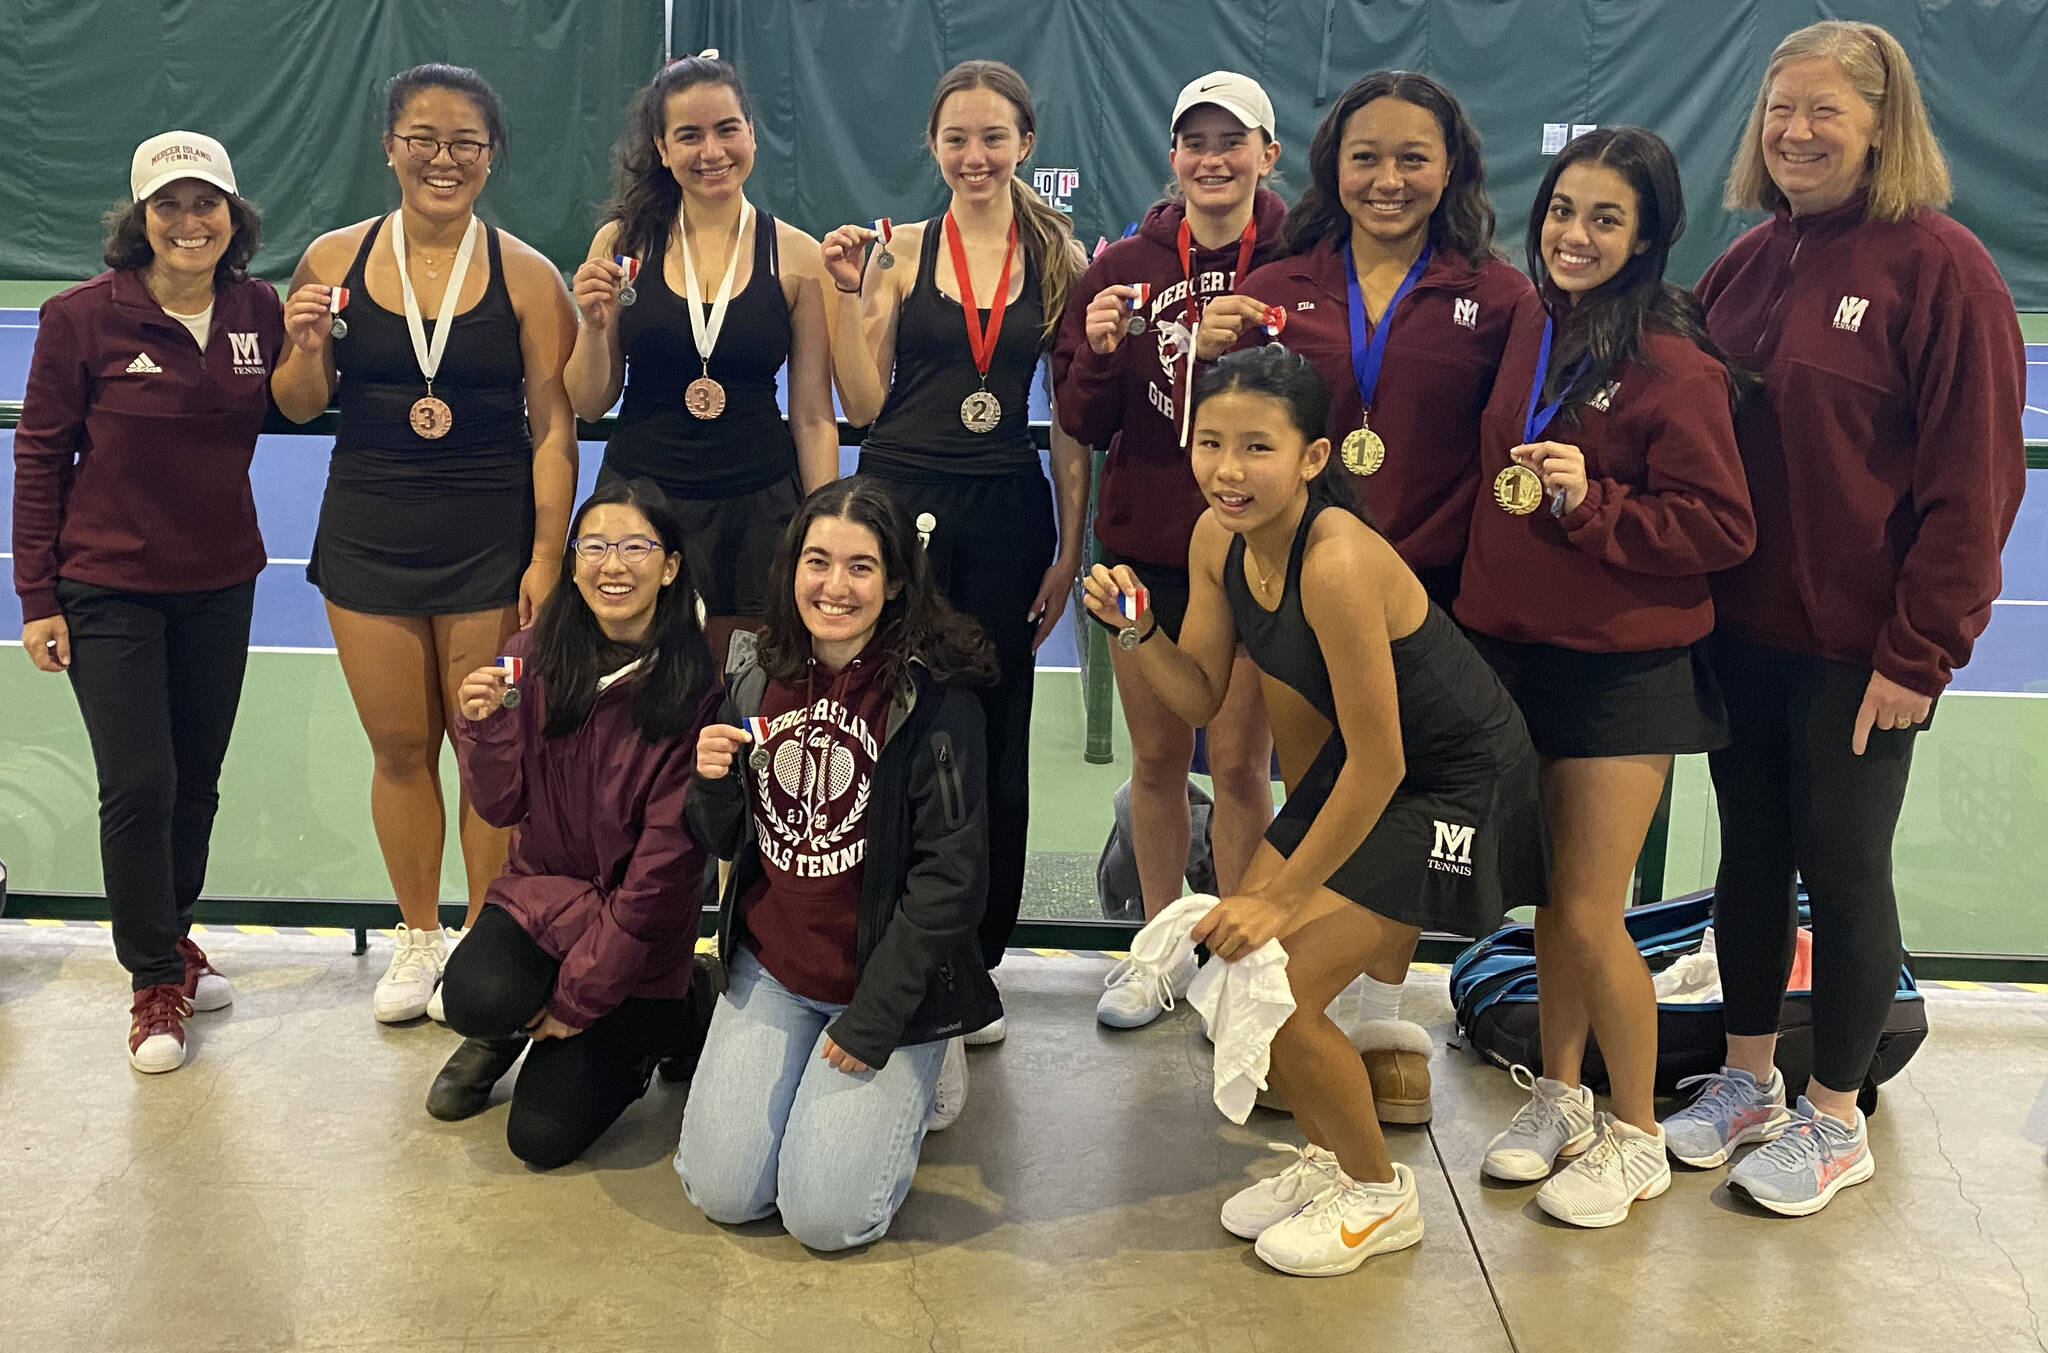 The Mercer Island High School girls tennis squad recently won the 3A KingCo tournament title and advanced to districts. Top row, left to right: Coach Carol Gullstad, third-place KingCo doubles partners Izzy Roe and Mira Patel, second-place KingCo doubles partners Ava Chatalas and Rachel Garton, first-place KingCo doubles partners Ella Simpson and Jaya Manhas and coach Julie Stillman. Bottom row, left to right: Maya Wong, Sanan Karami and fourth-place KingCo singles player Chloe DeGracia. The doubles teams of Simpson-Manhas (No. 1) and Garton-Chatalas (No. 2), and singles player DeGracia (No. 6) advanced to state. The Roe-Patel doubles squad (No. 7) is a state alternate. Photo courtesy of Niraj Patel